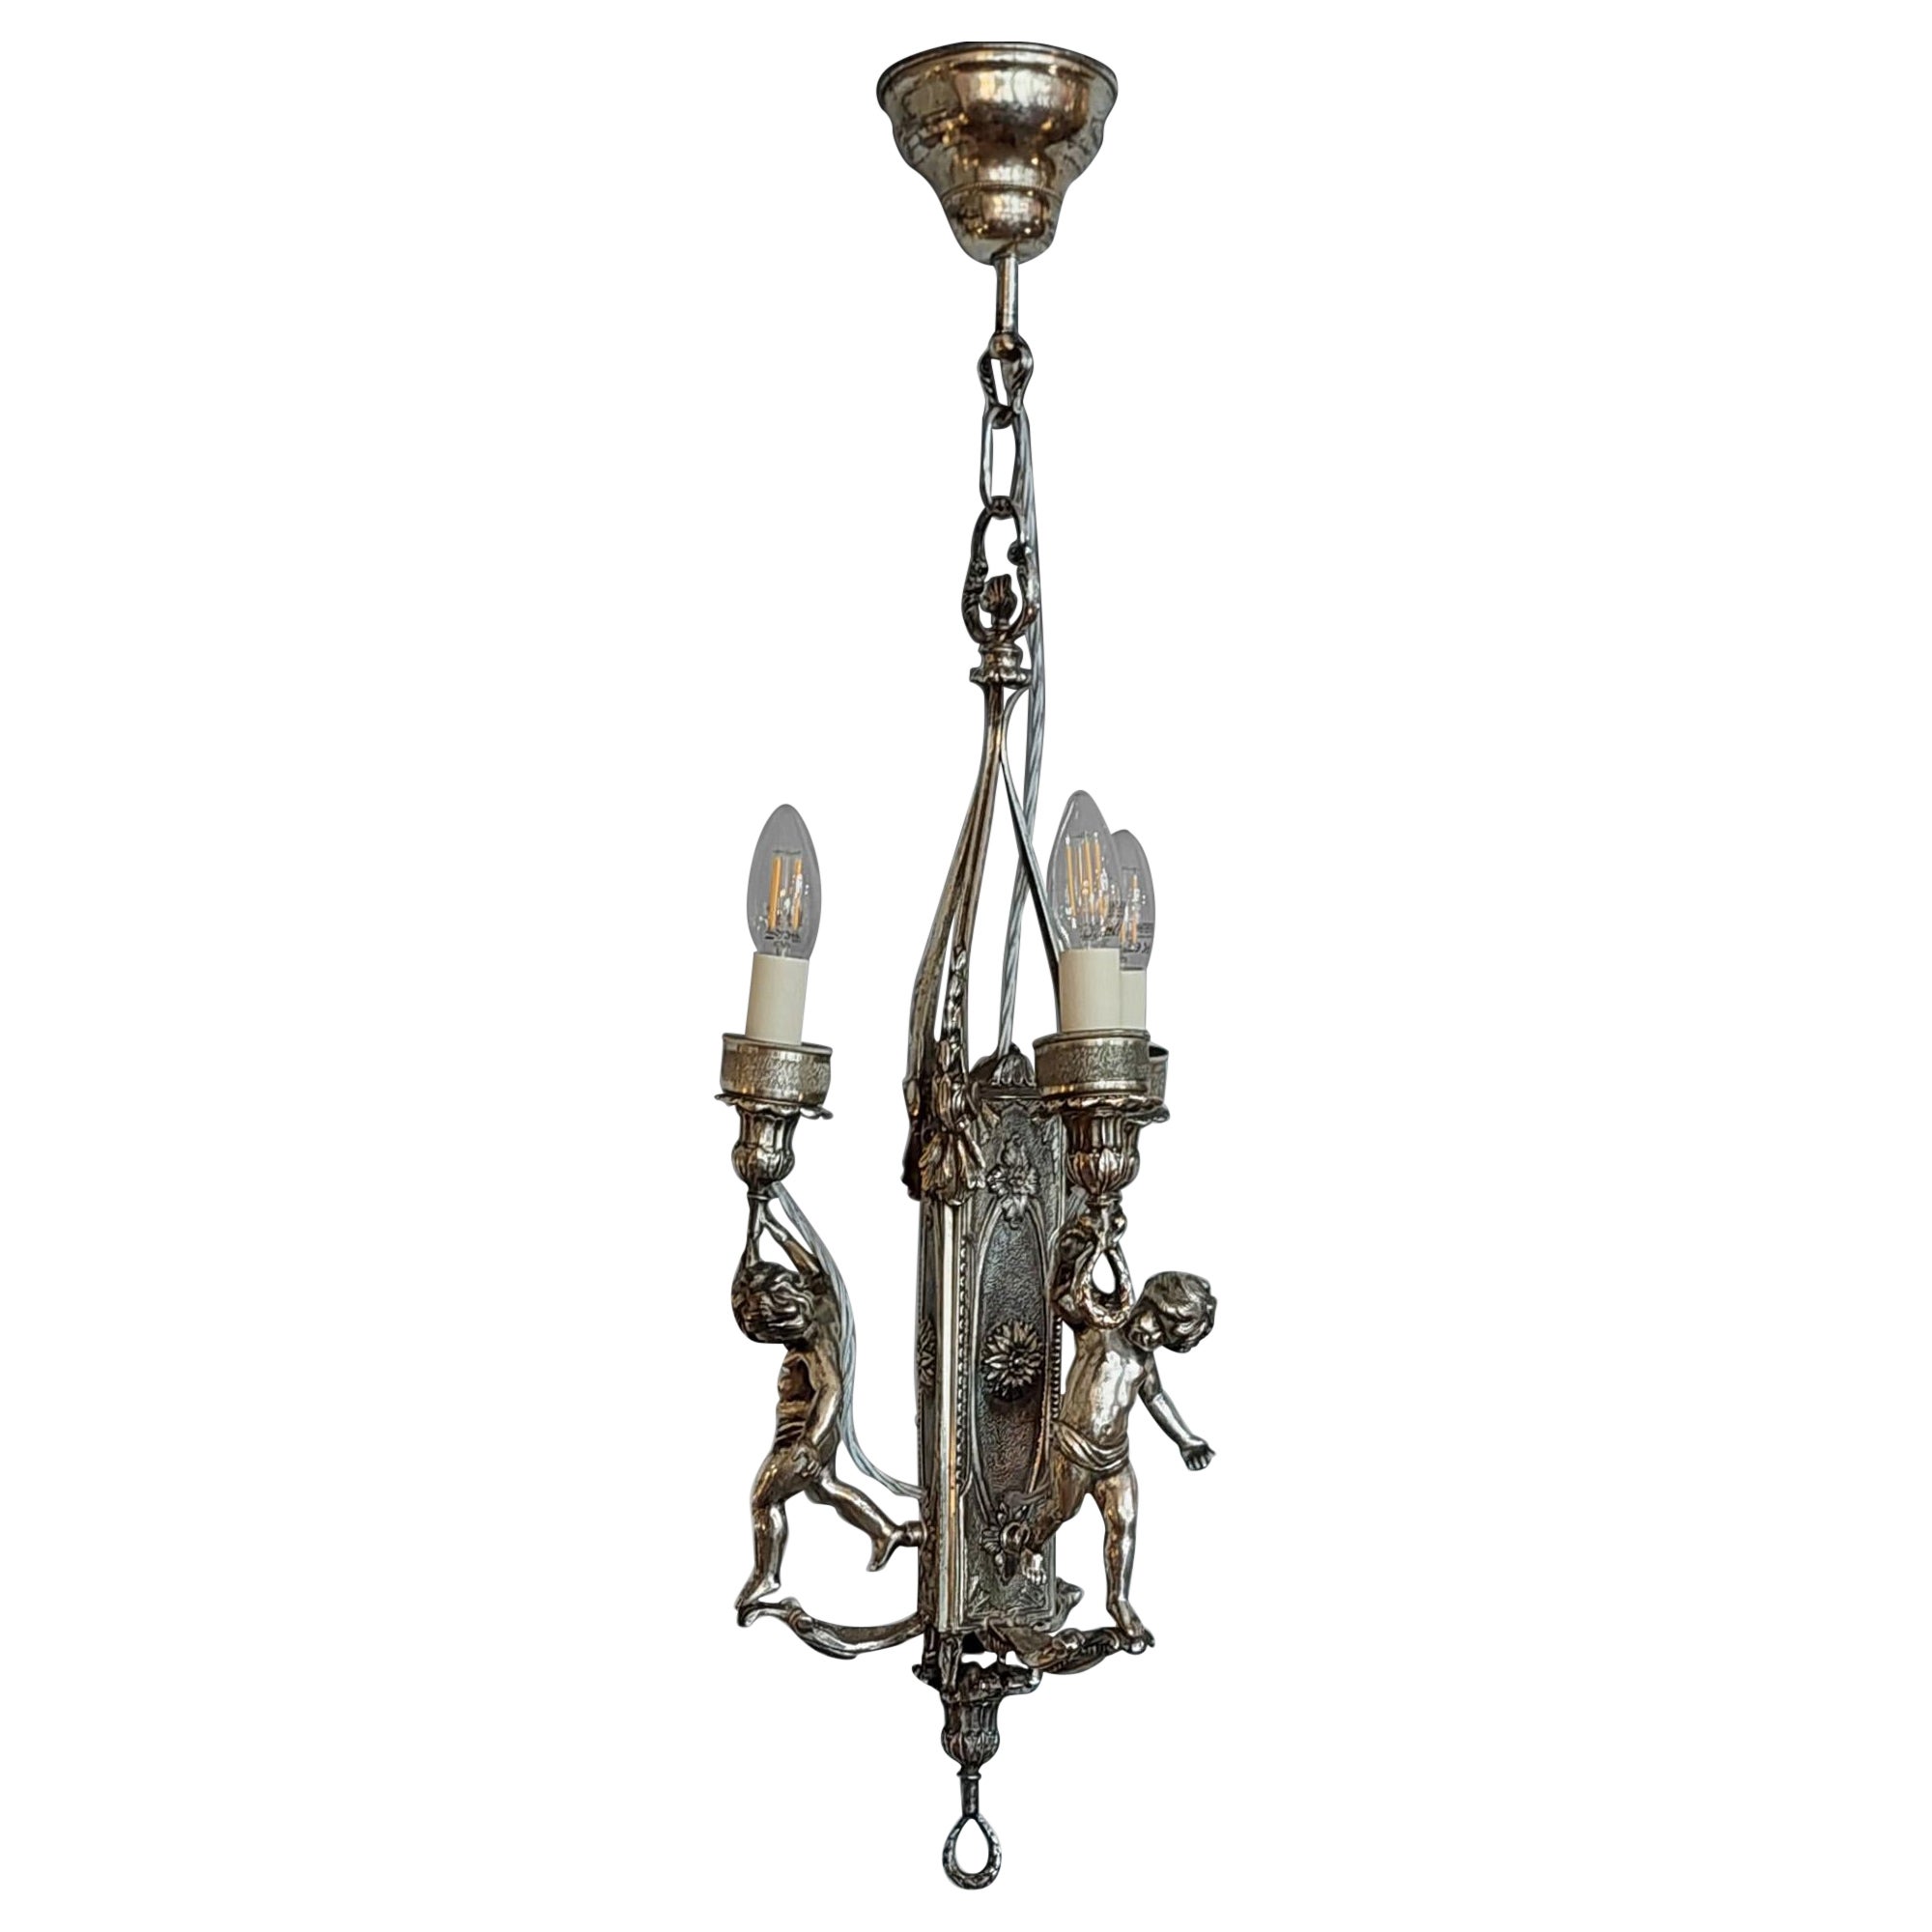 Mid 19thC Silver Plated Ceiling Candle Light Fitting For Sale